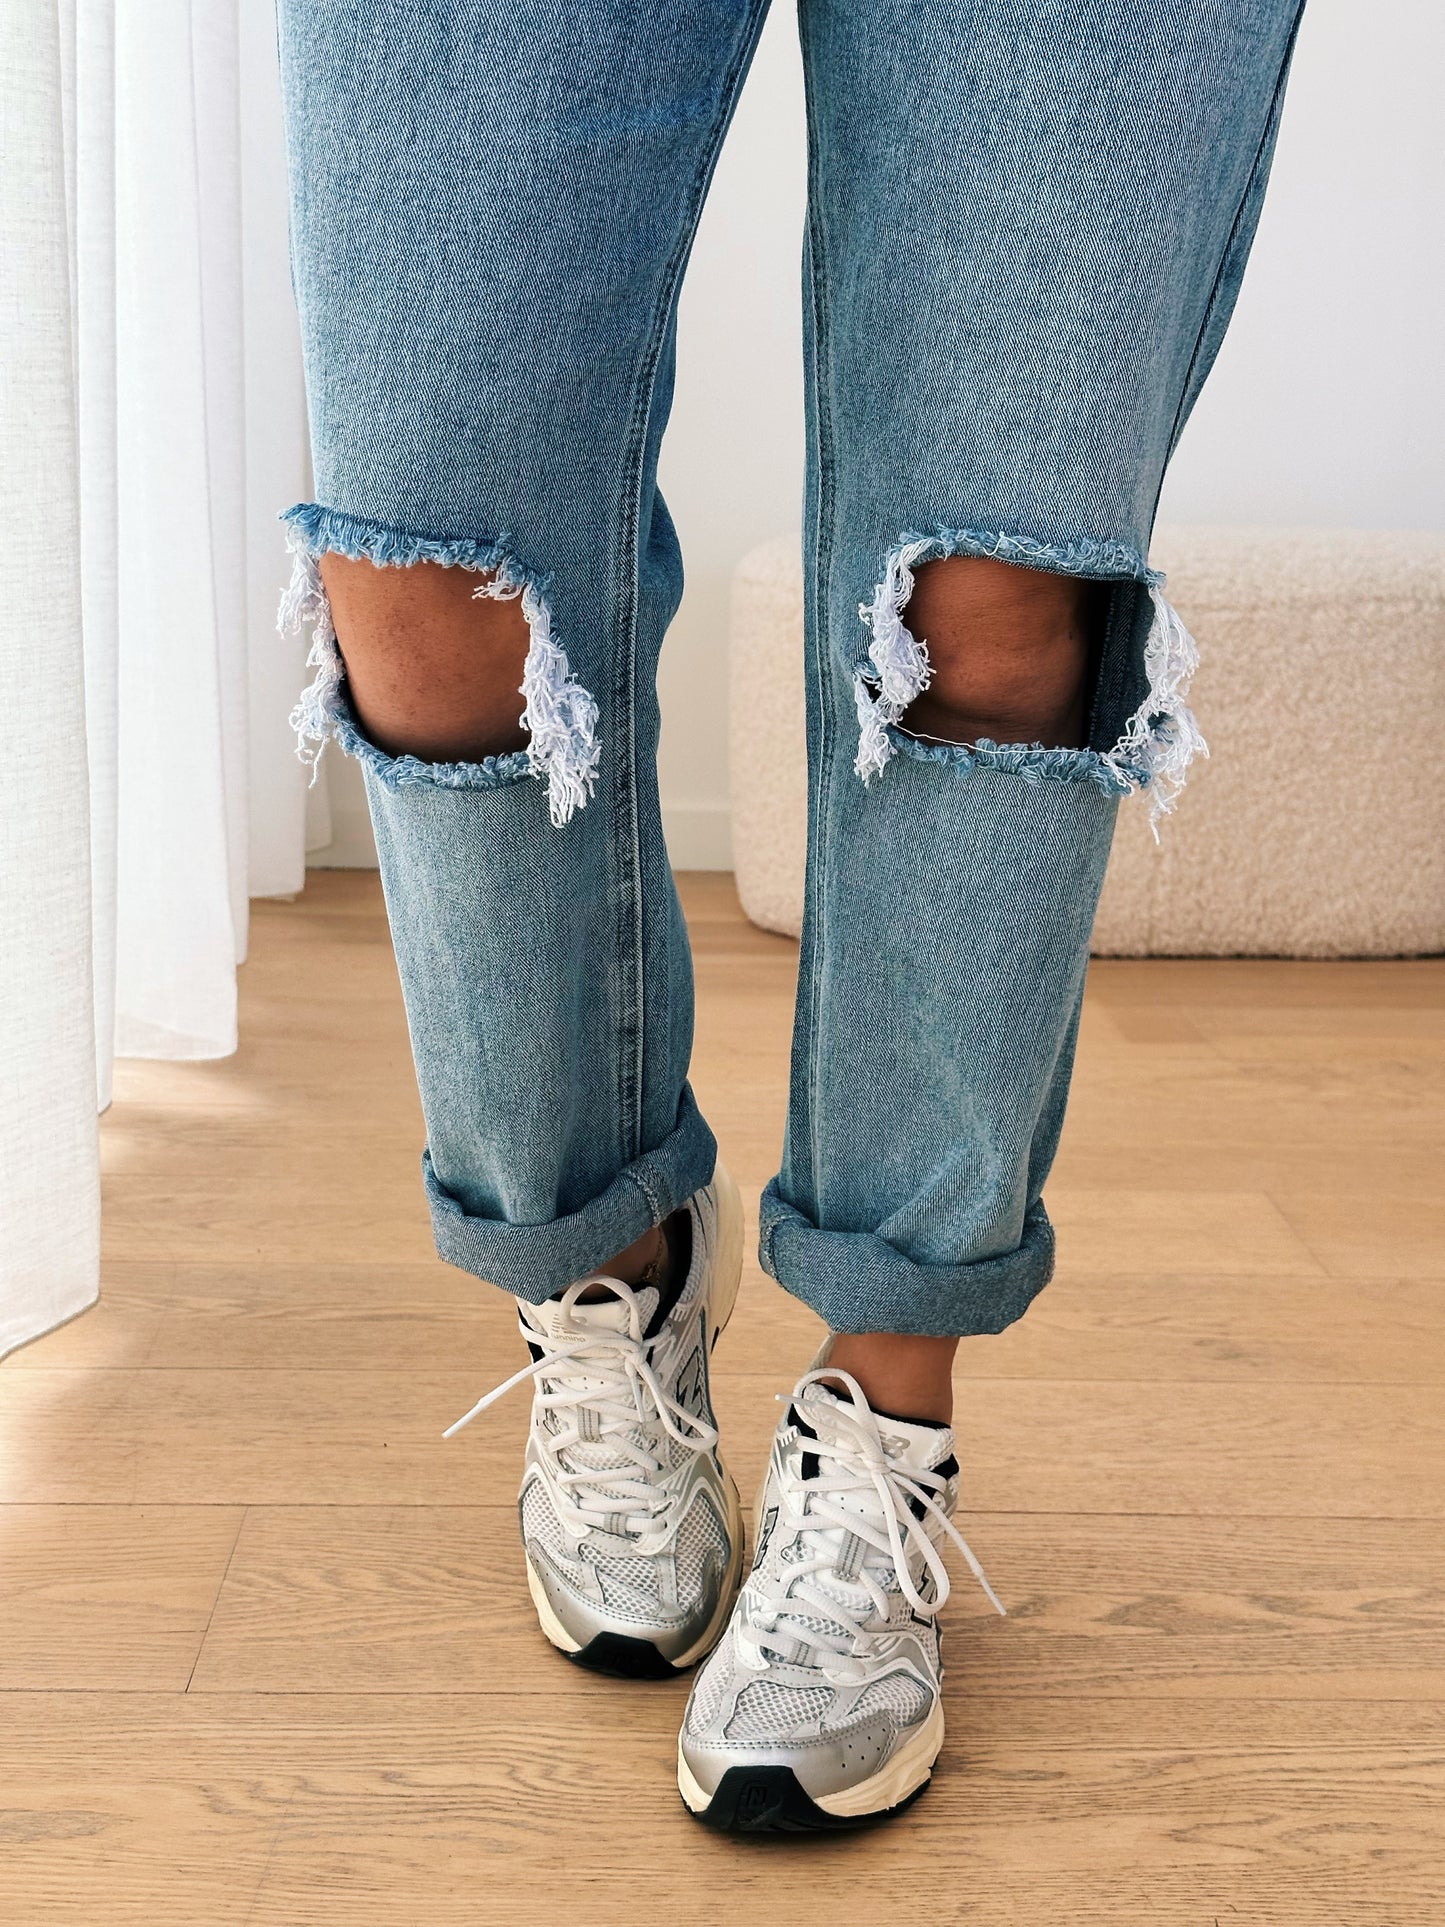 MAY Jeans - Straight destroyed denim